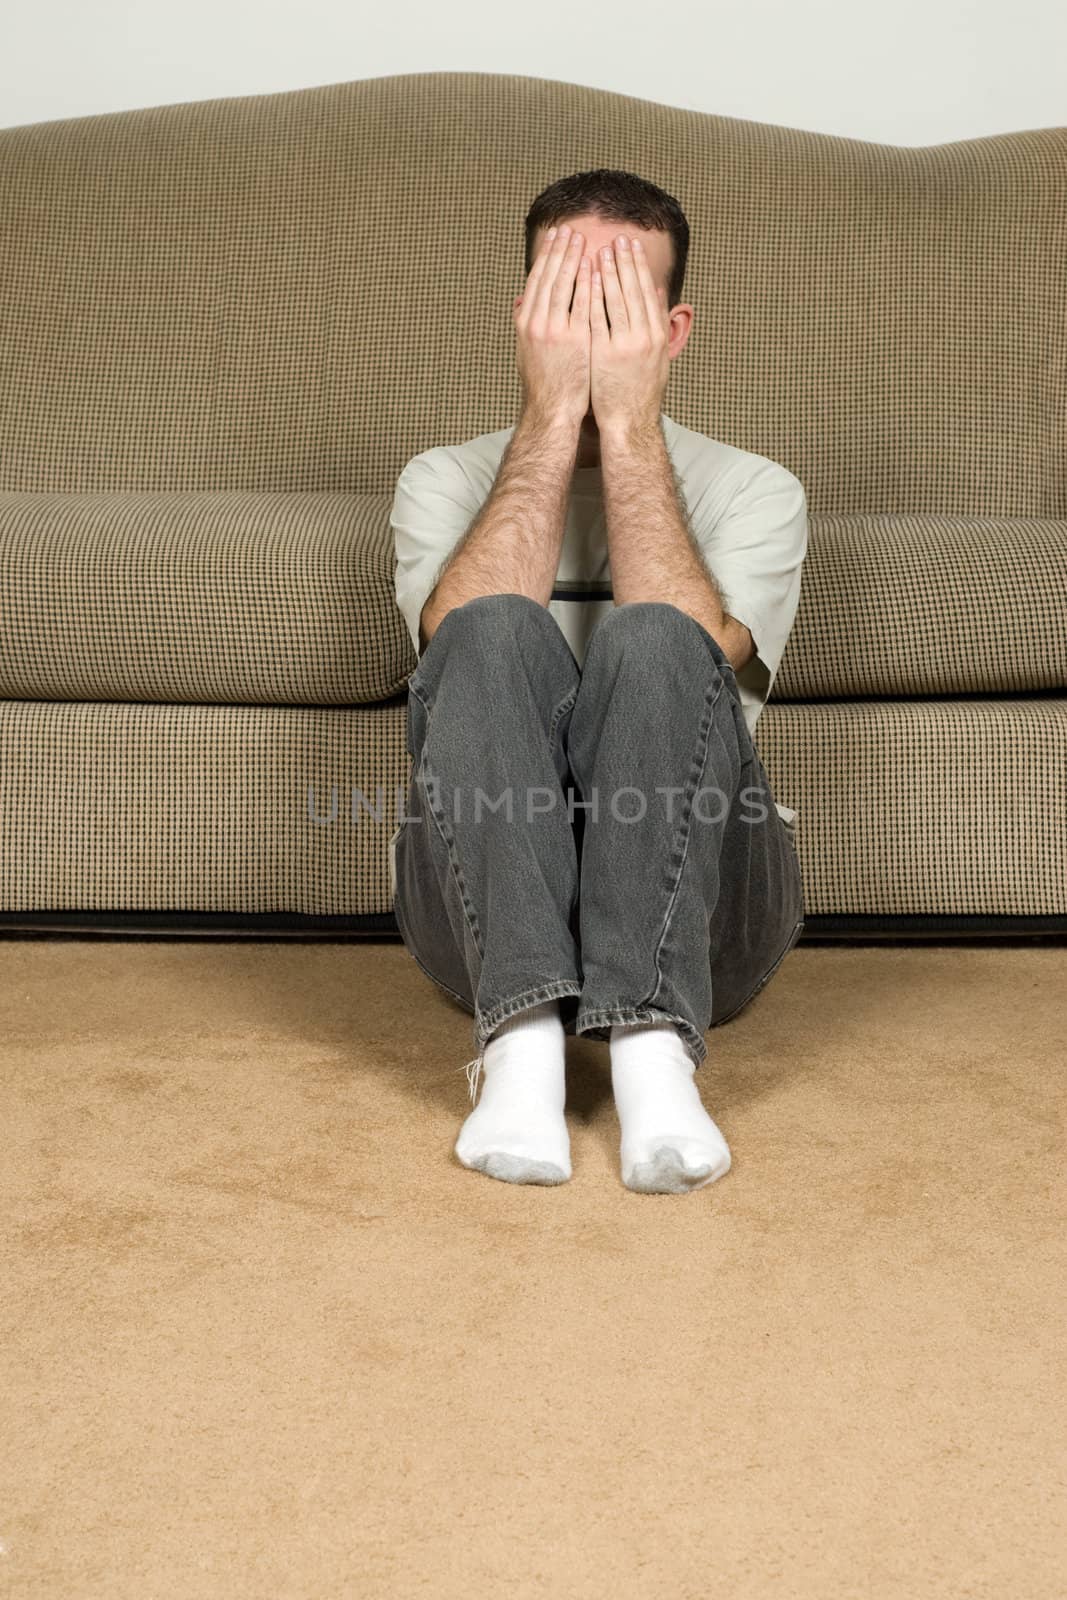 A depressed man covering his face and sitting on the floor near the sofa